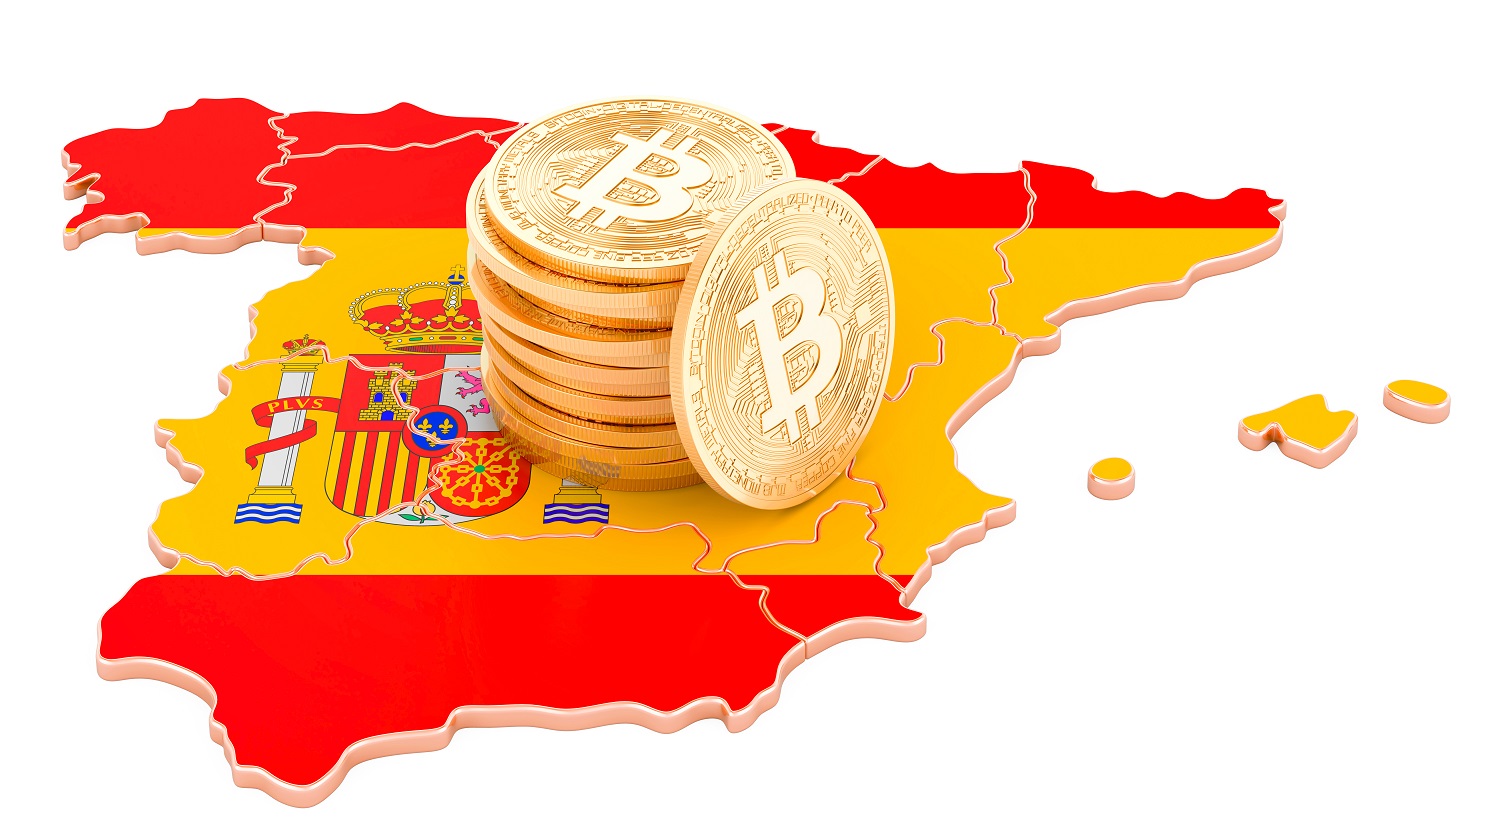 A 3D map of Spain, decorated in the colors of the Spanish national flag, with a stack of metal tokens meant to represent bitcoin.